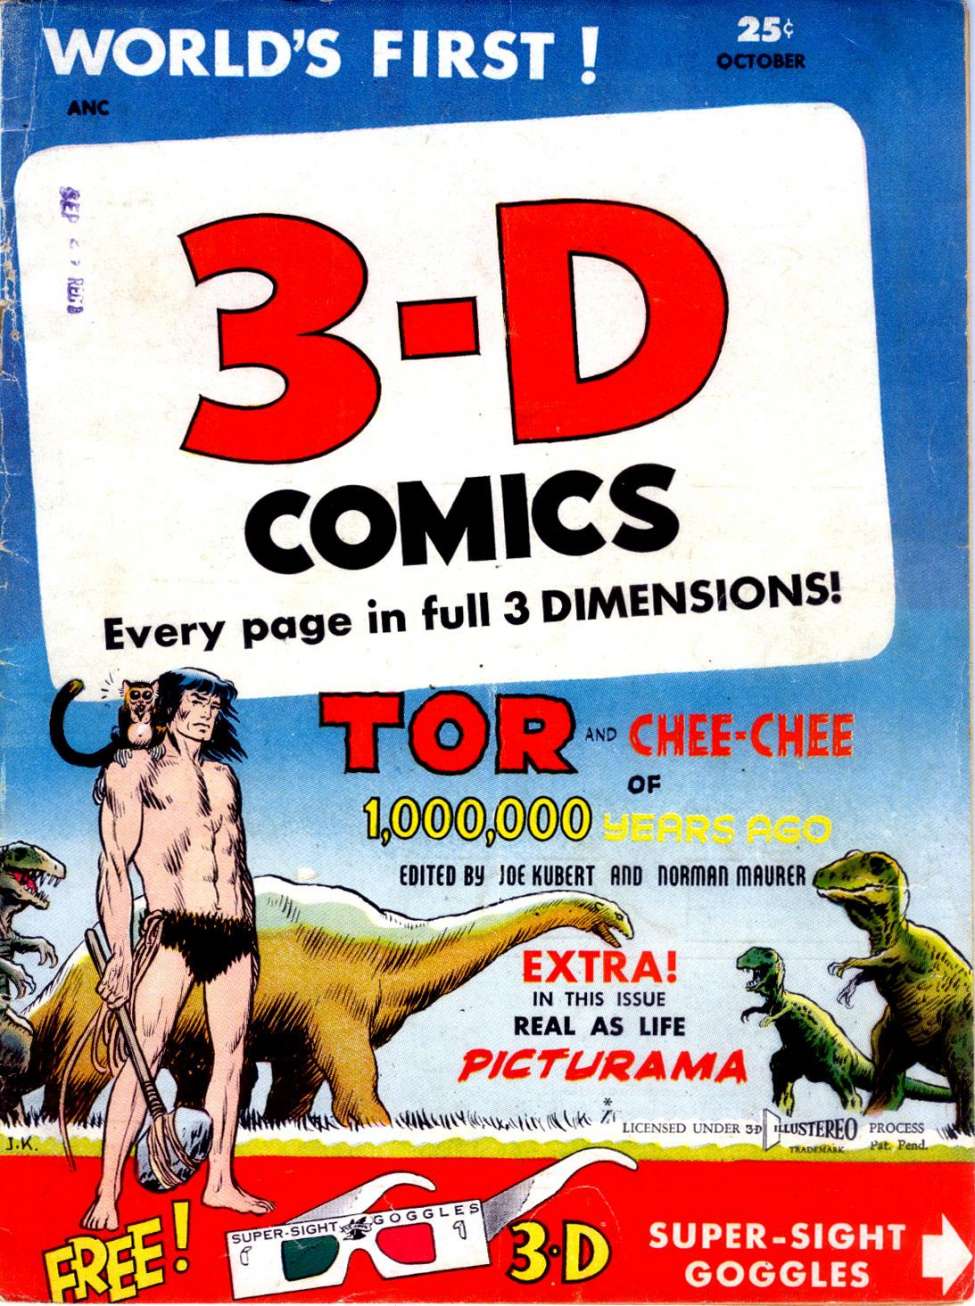 Book Cover For 3D Comics 2a Tor - Version 2